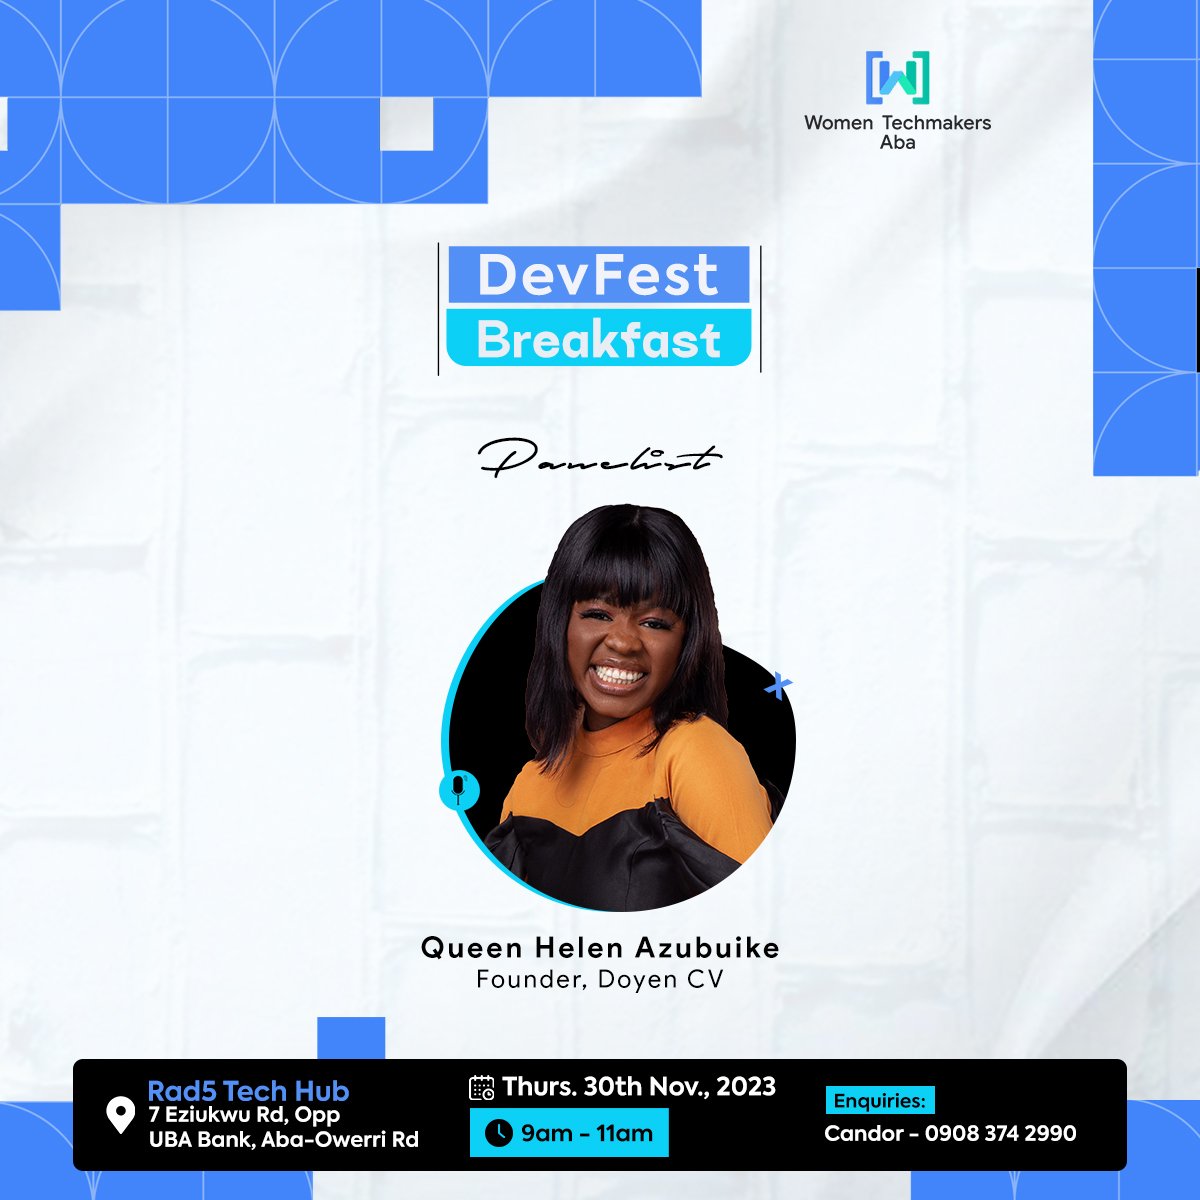 Announcing our panelists!

@DoyenCV will be gracing our stage this year!
Helen is an elegant host and the founder of Doyen CV!

We bet you're itching to know the other panelists!